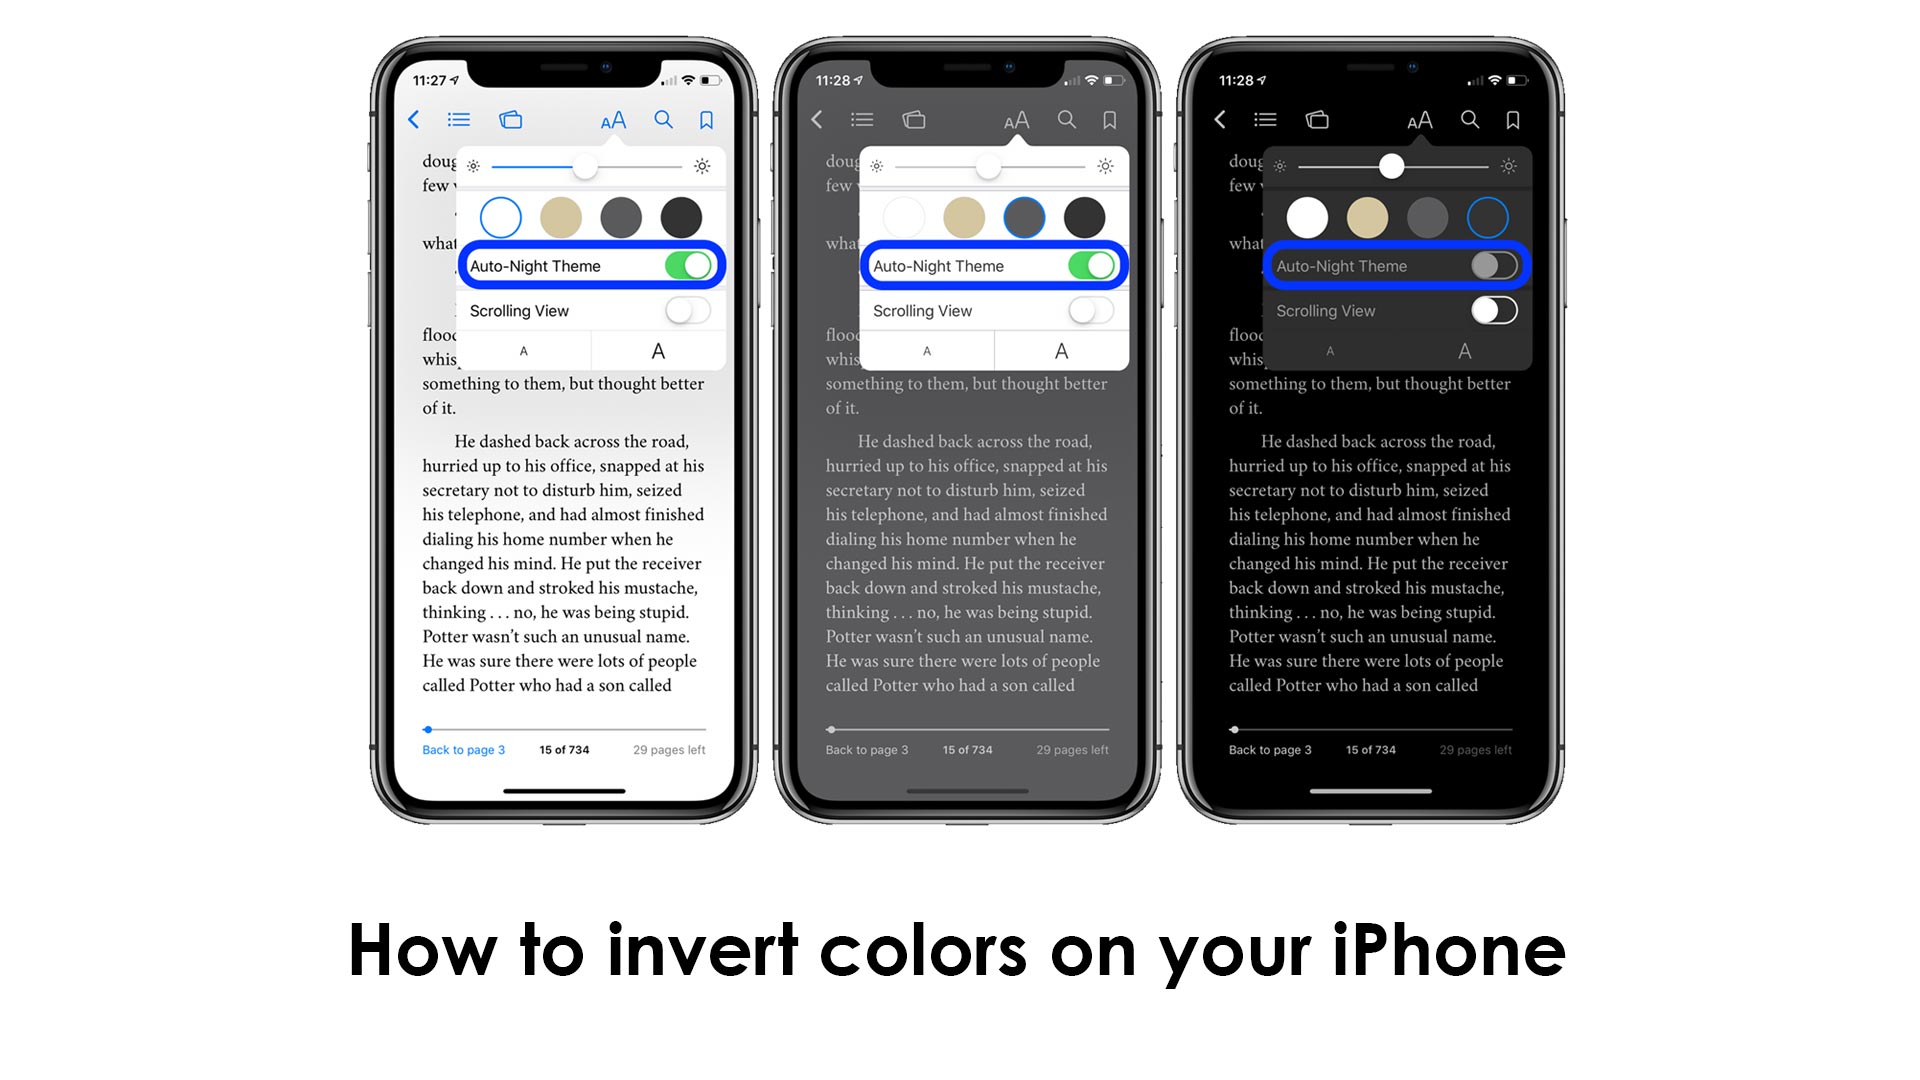 How to invert colors on your iPhone